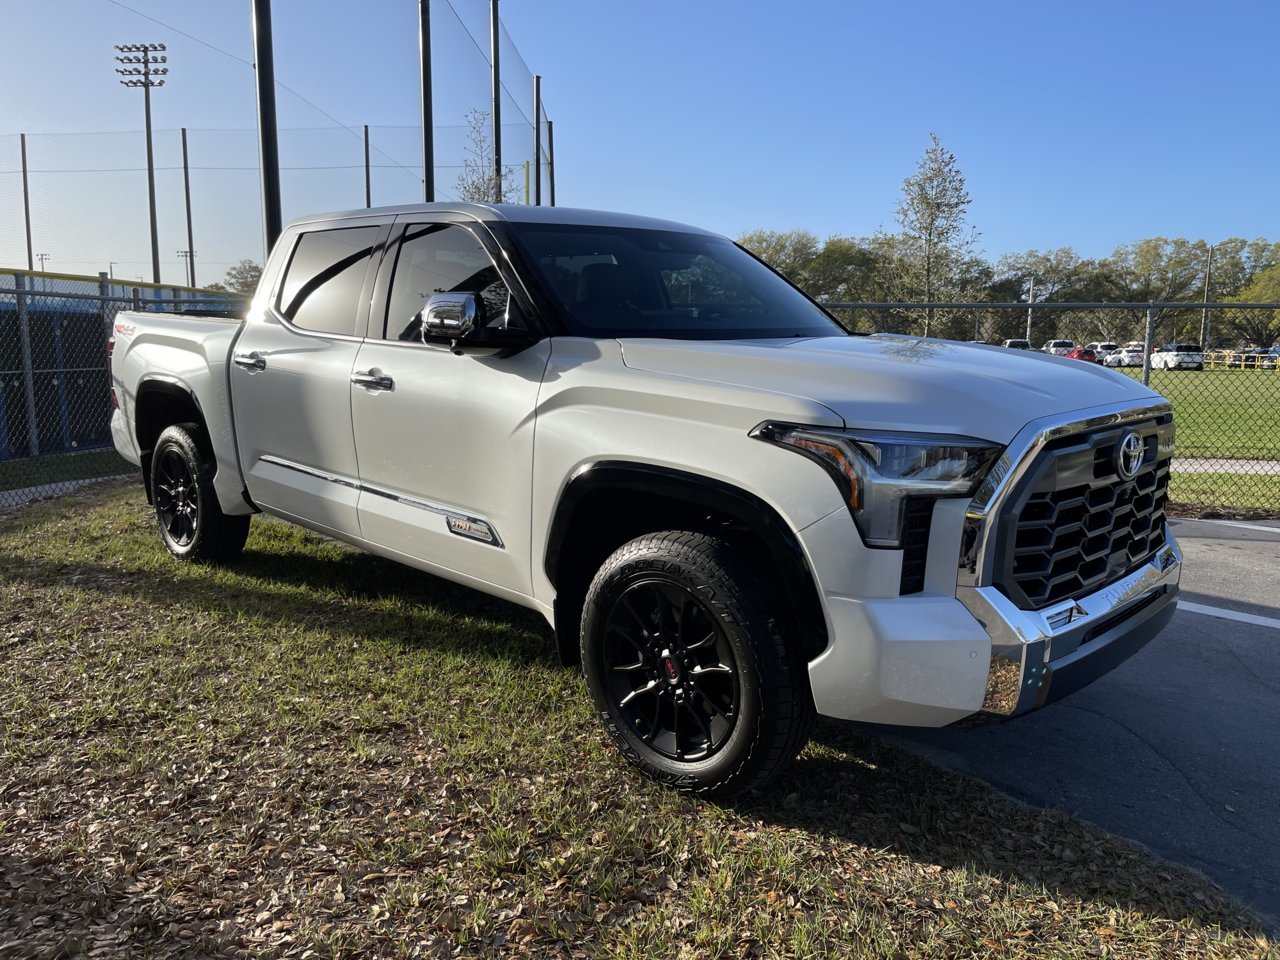 How white is wind chill pearl? Toyota Tundra Forum